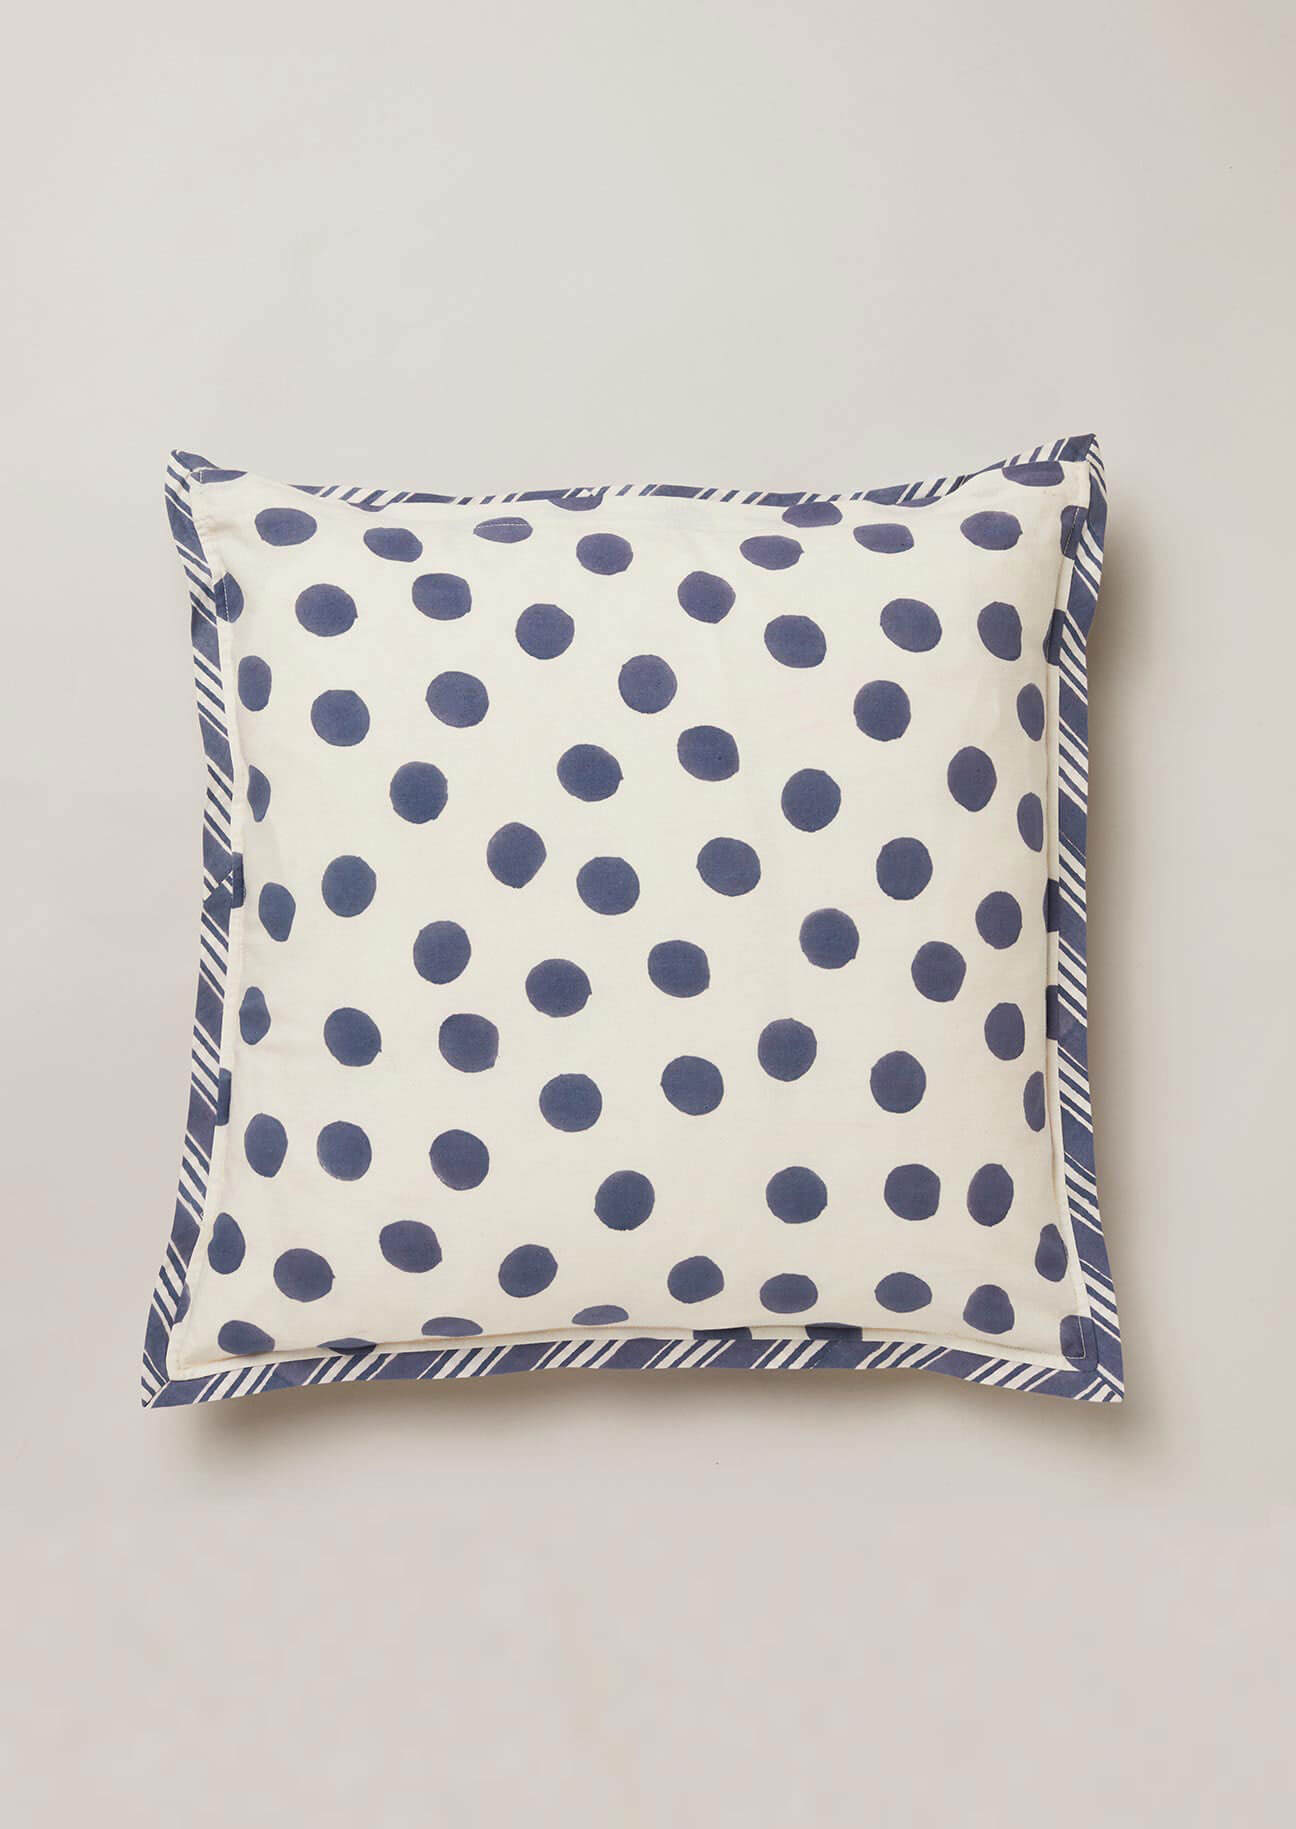 Reverside of blcok printed cushion featuring a navy polka dot design onto a white ground.